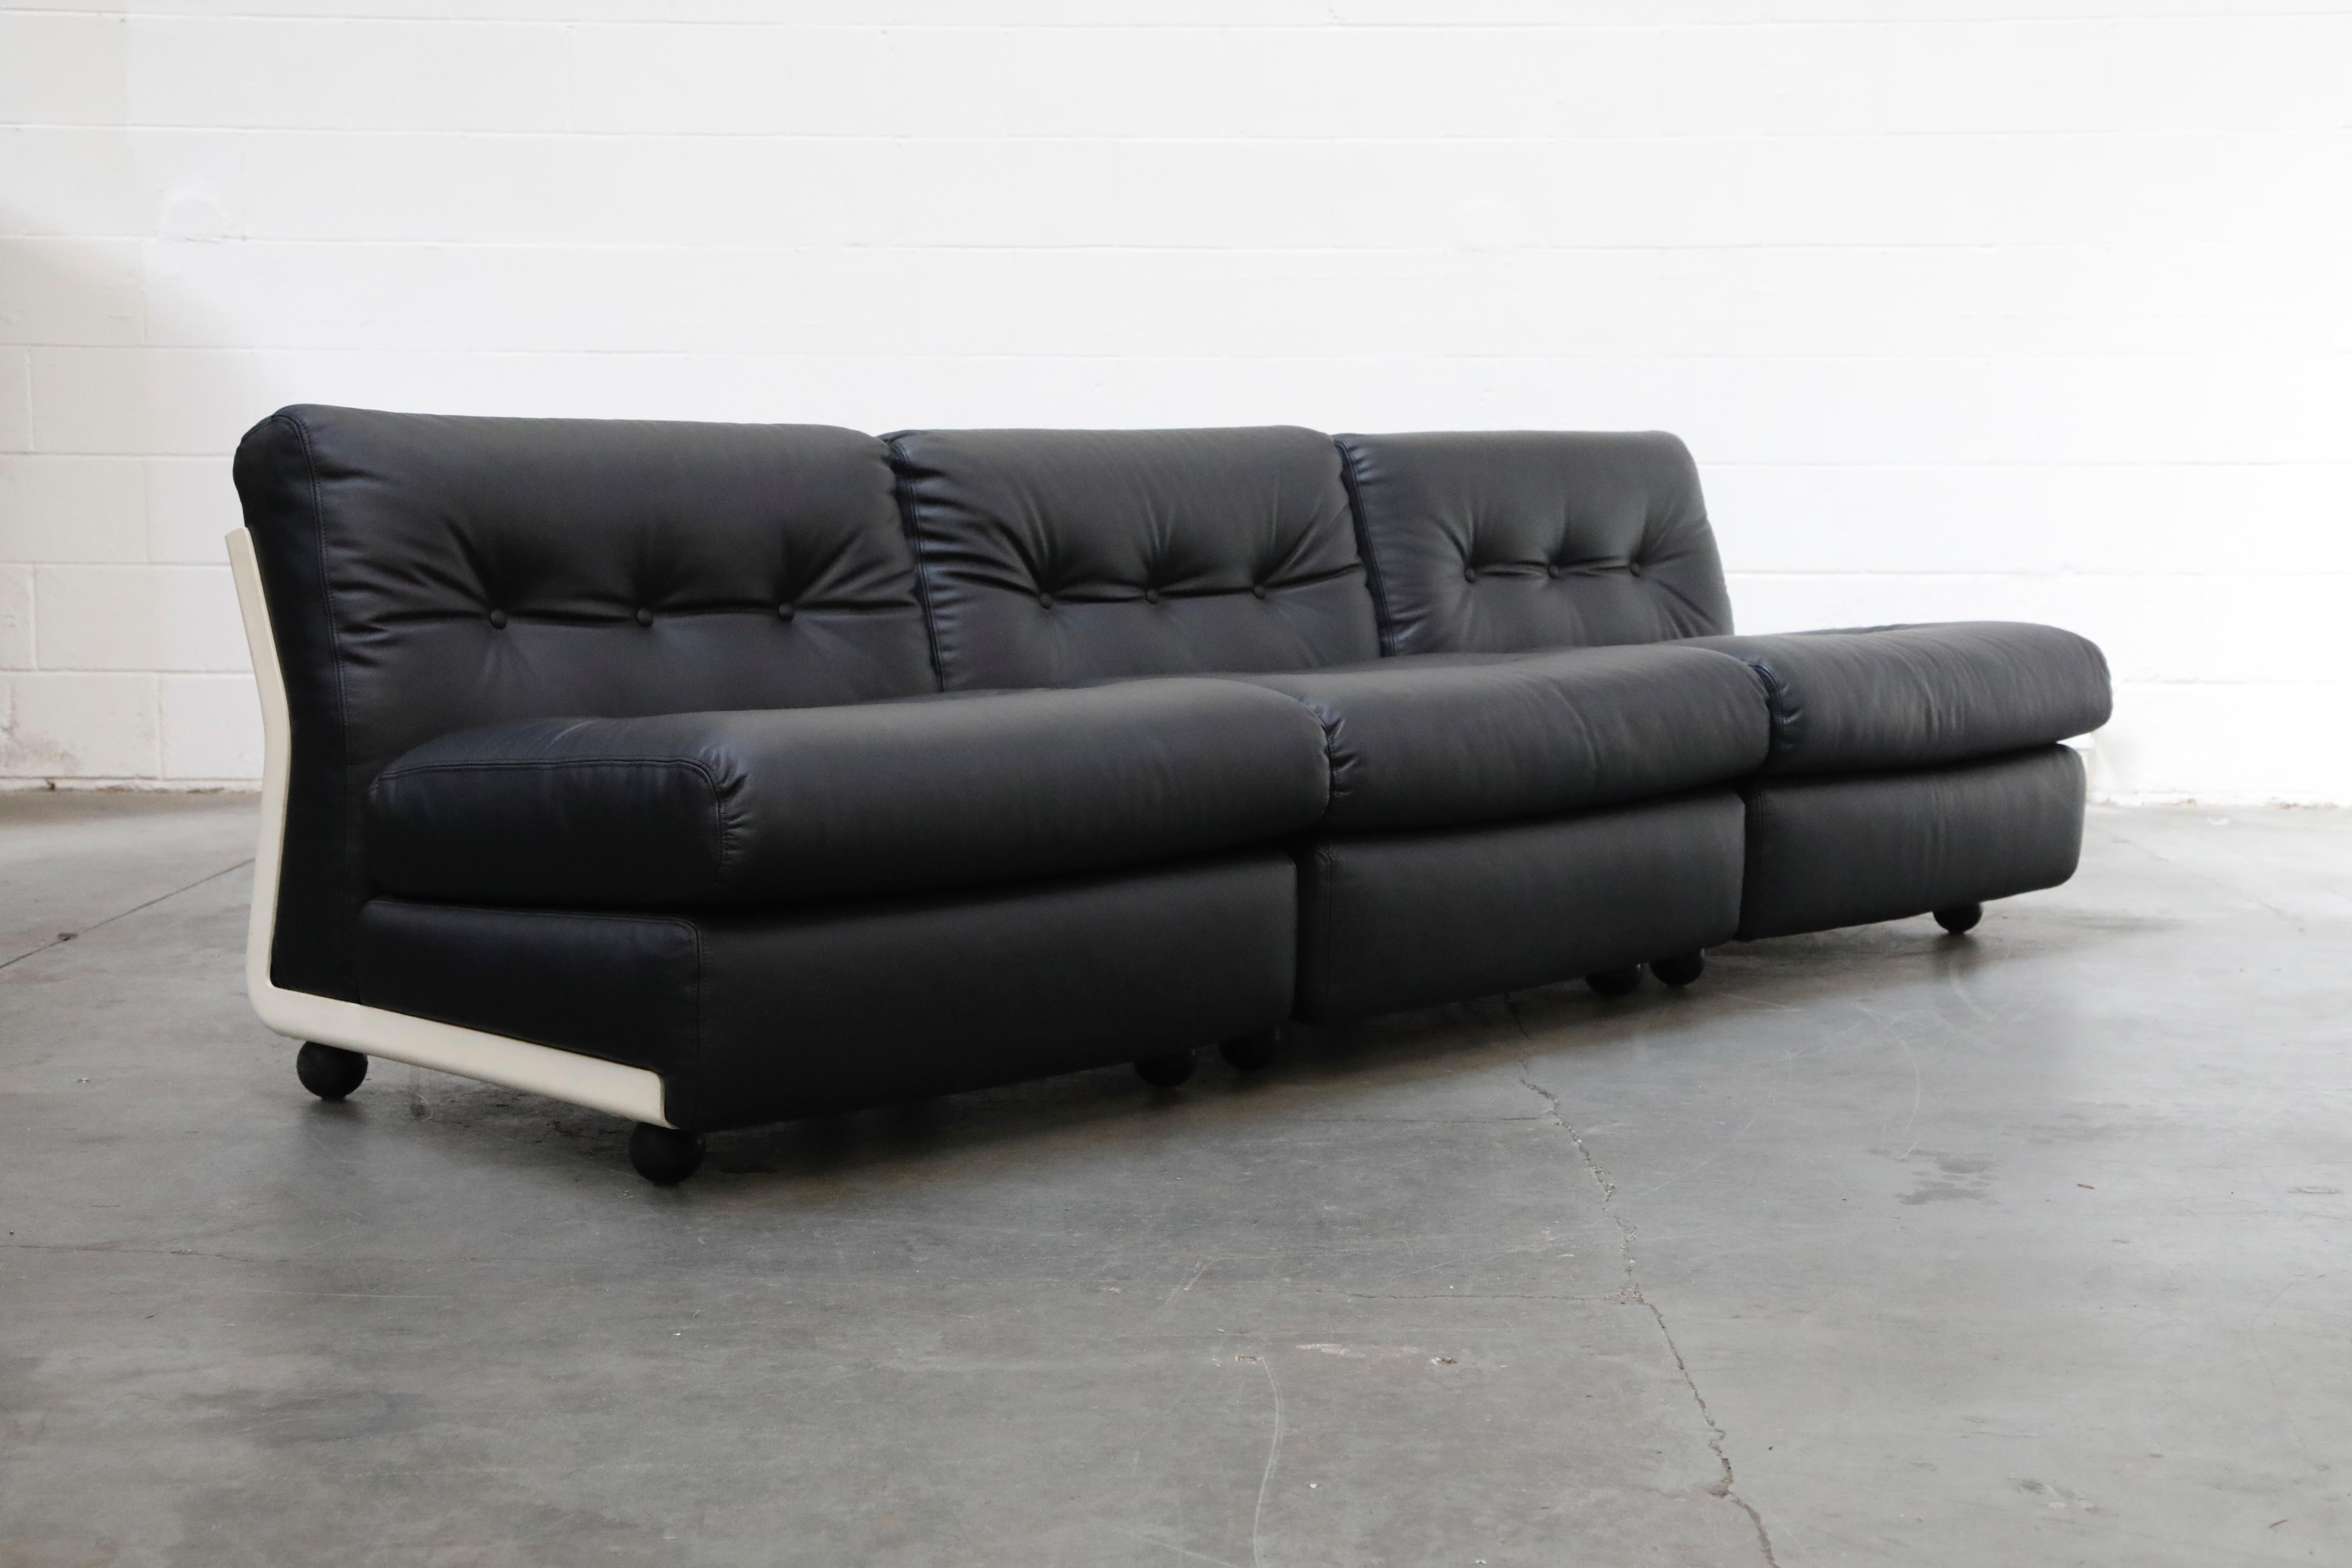 Mid-Century Modern 'Amanta' Sectional Lounges by Mario Bellini for C&B Italia, circa 1966, Signed